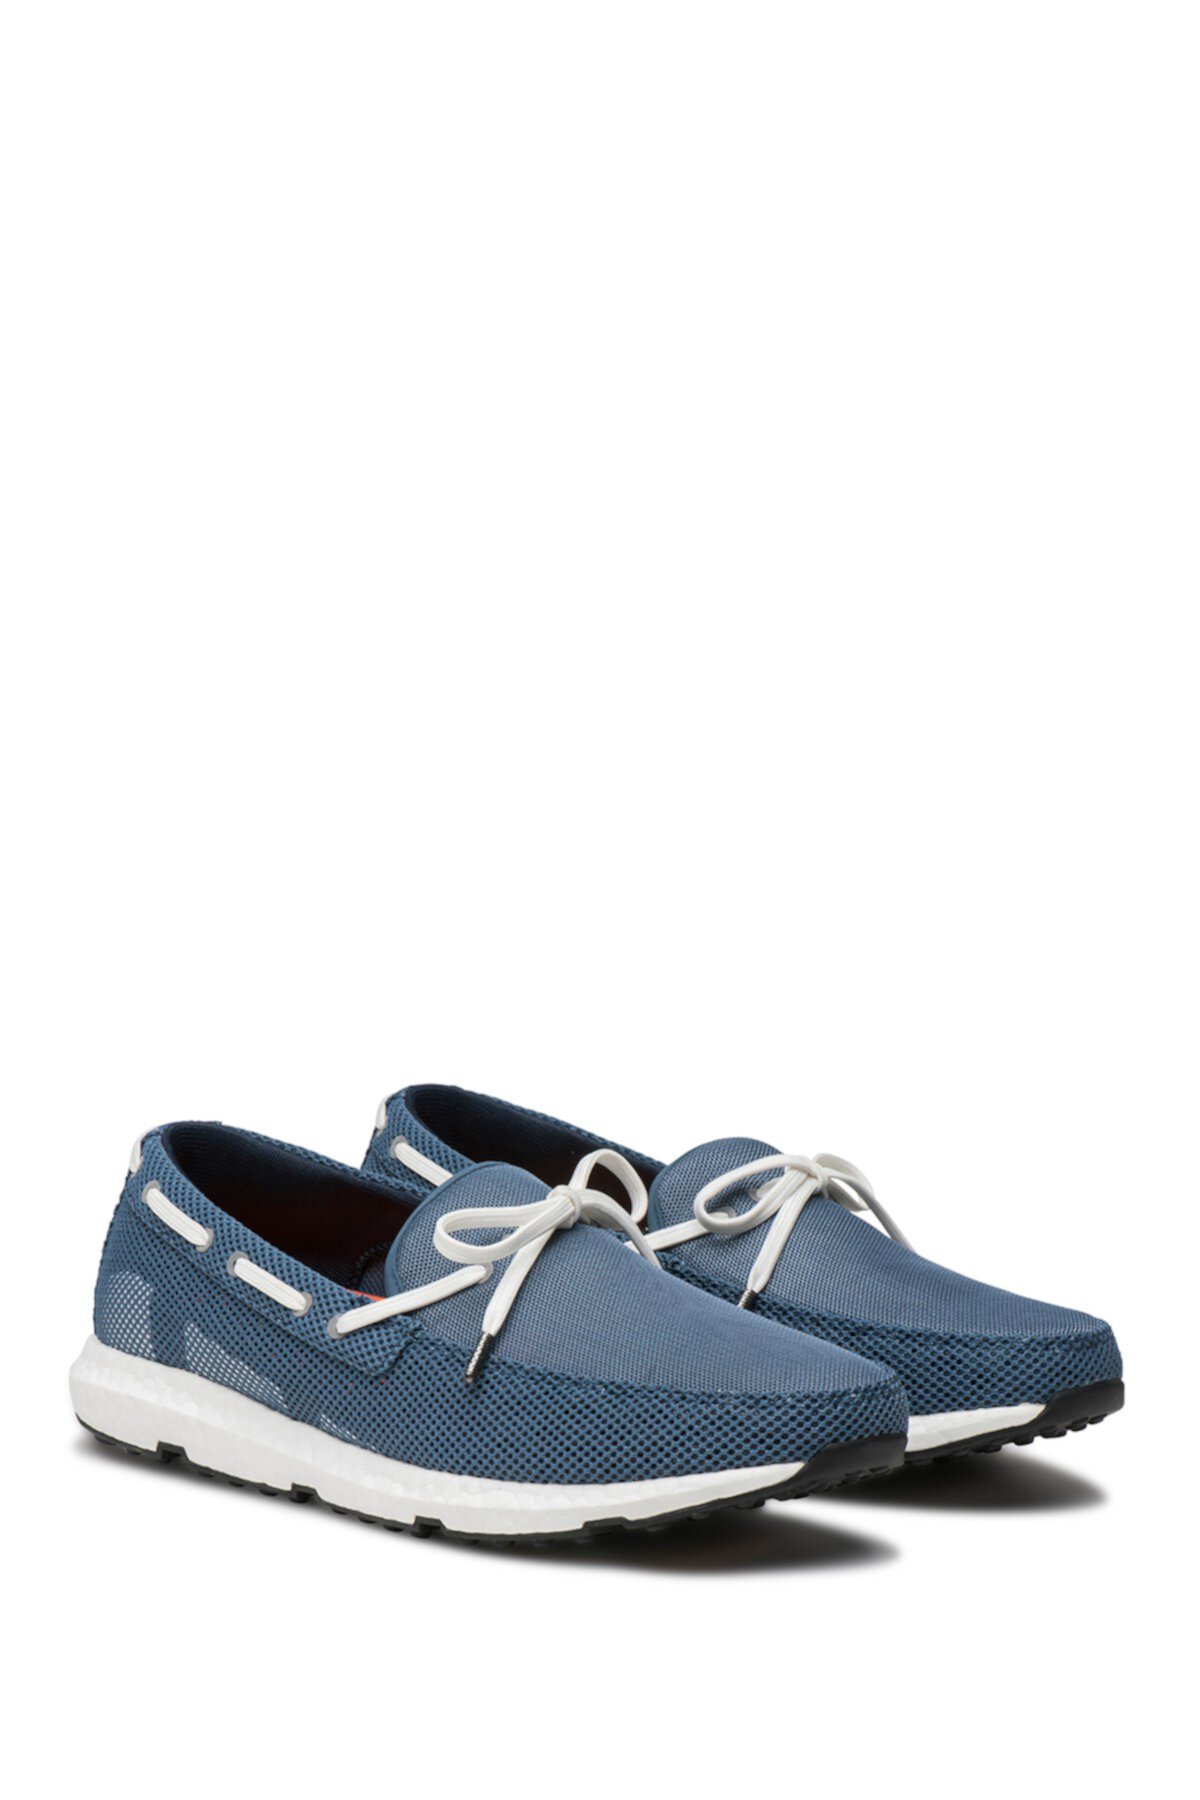 Breeze Leap Laser Loafer SWIMS